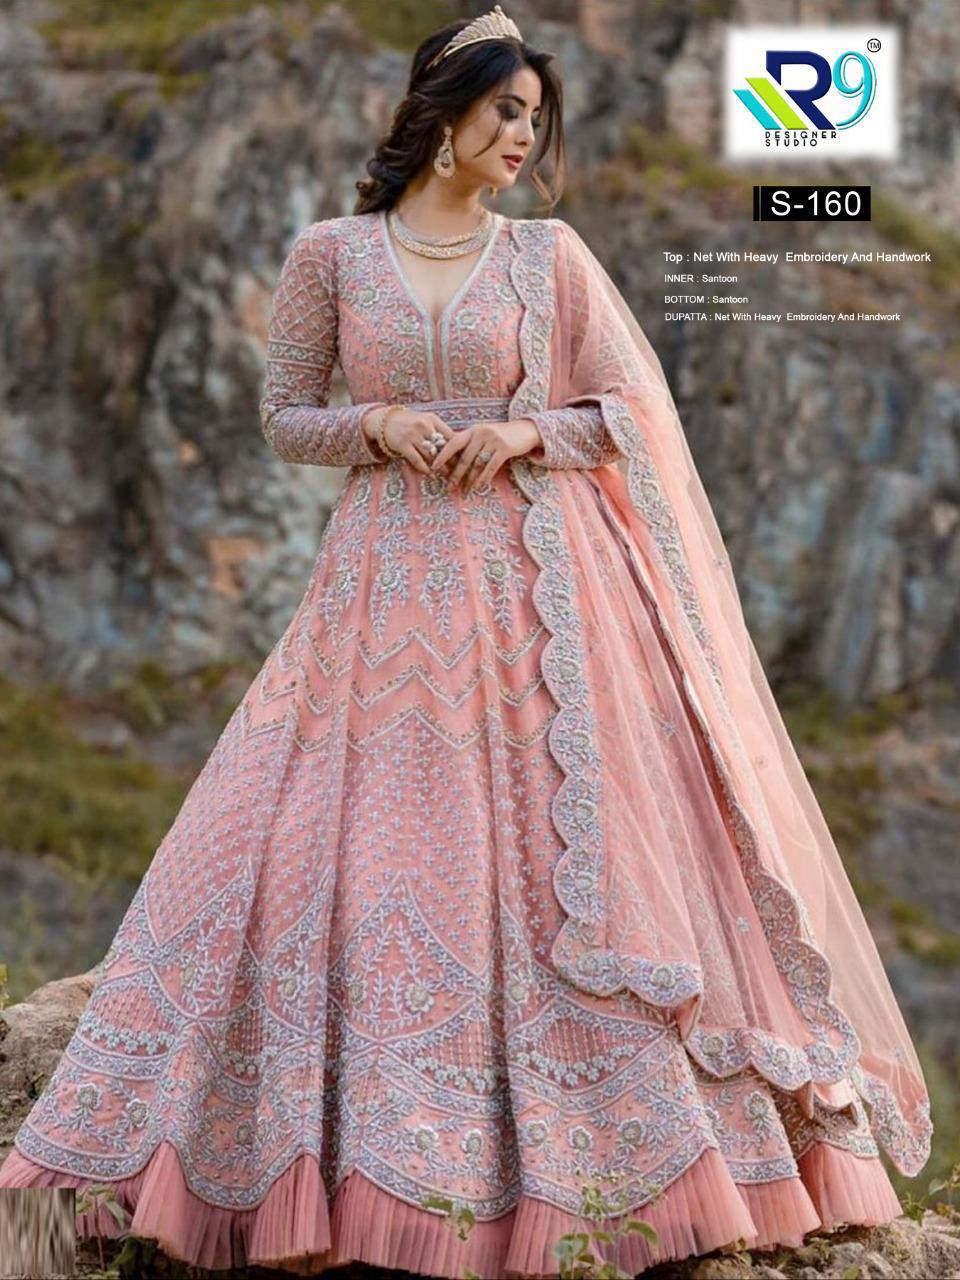 Pink Gown For Woman, Best Woman Solid Gawn, New Design Gown, Bollywodd Gown,  georegget gown for